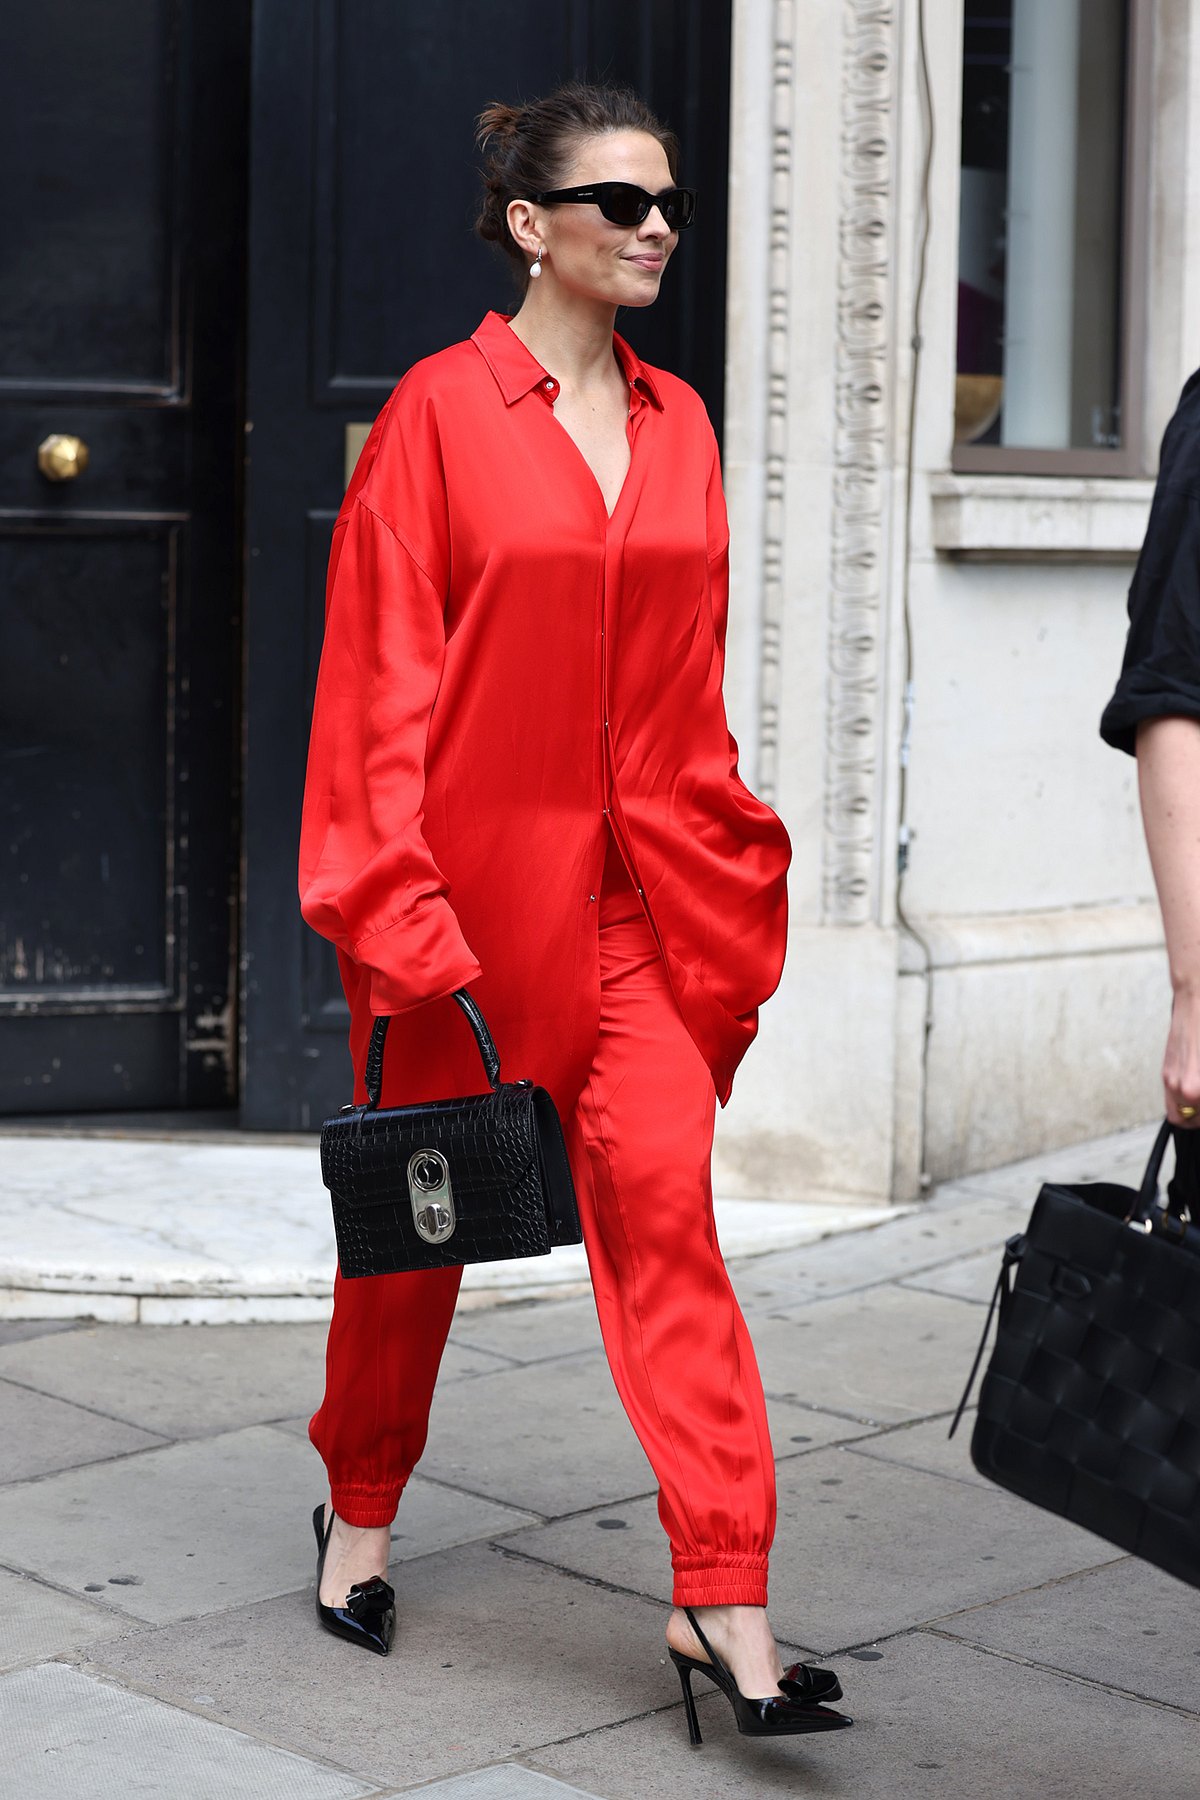 Lady in red: Monochromer Look mit Satinbluse